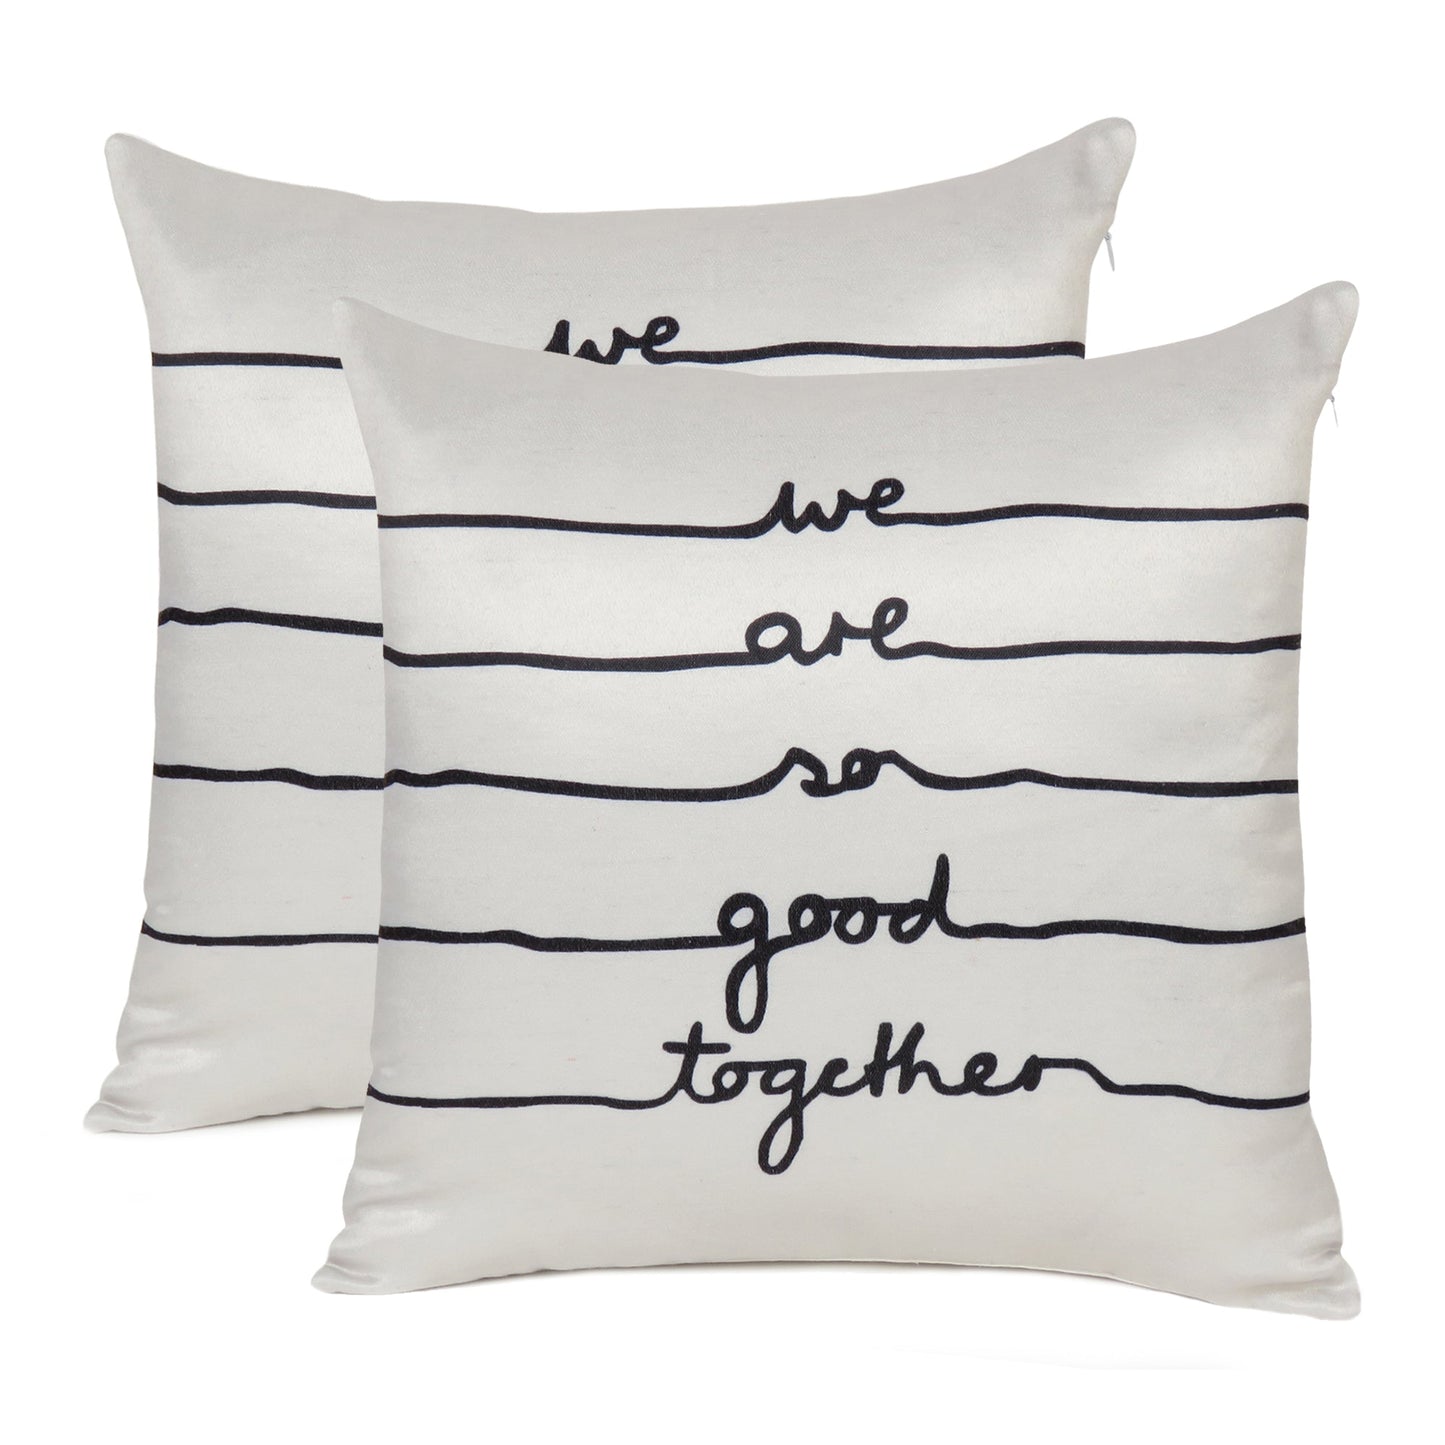 White Quote Printed Cushion Cover in Set of 2